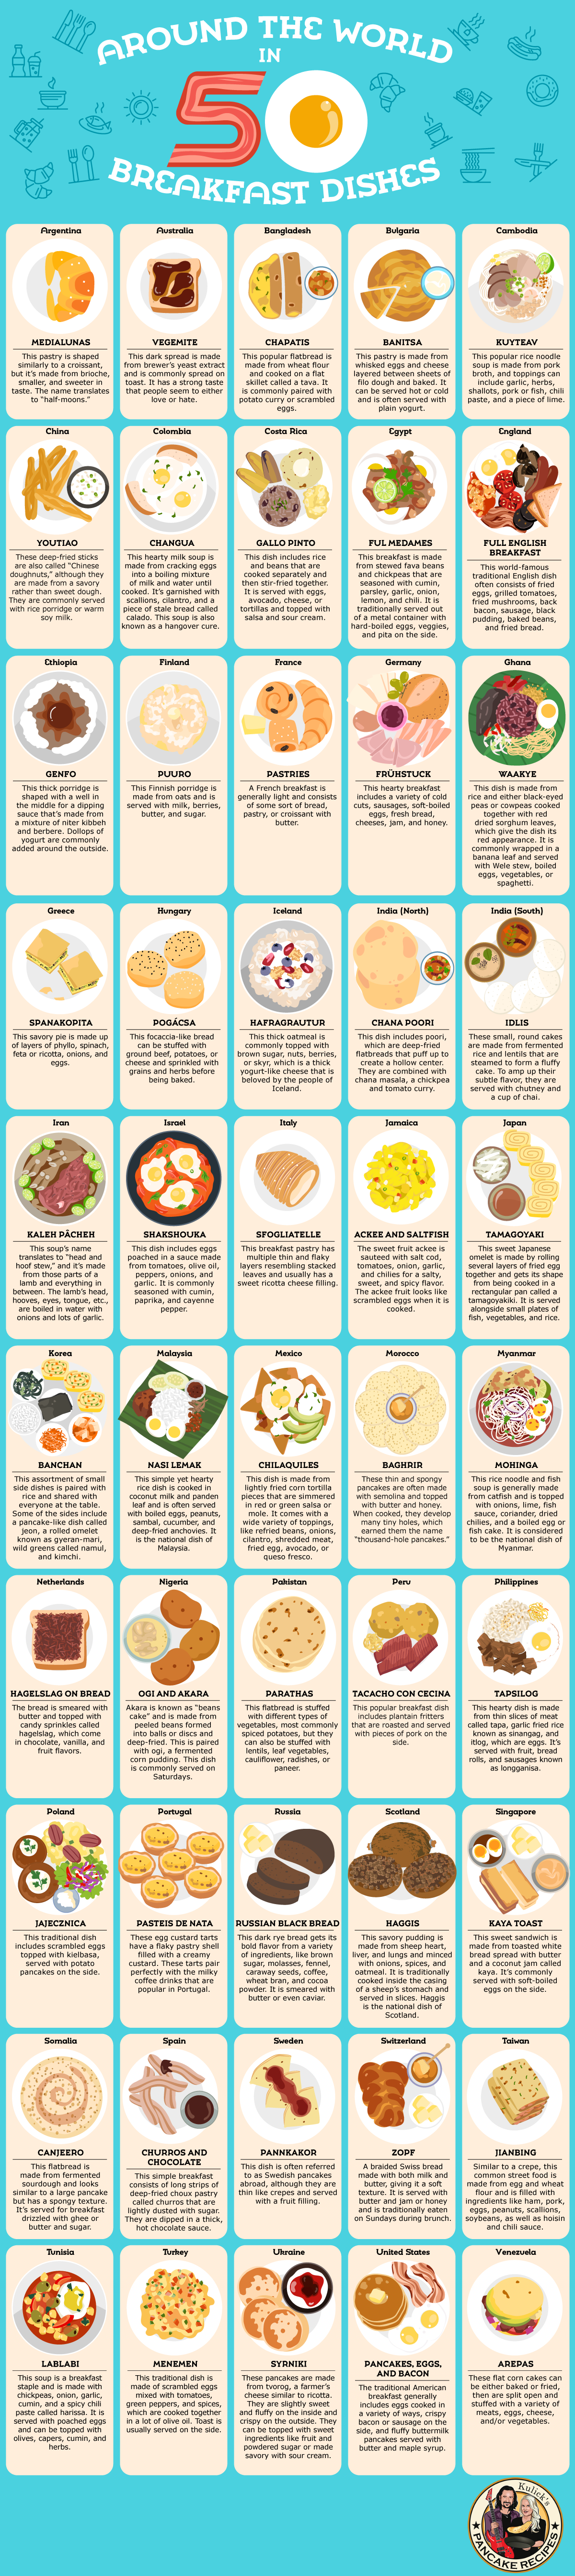 Around the World in 50 Breakfast Dishes - Infographic